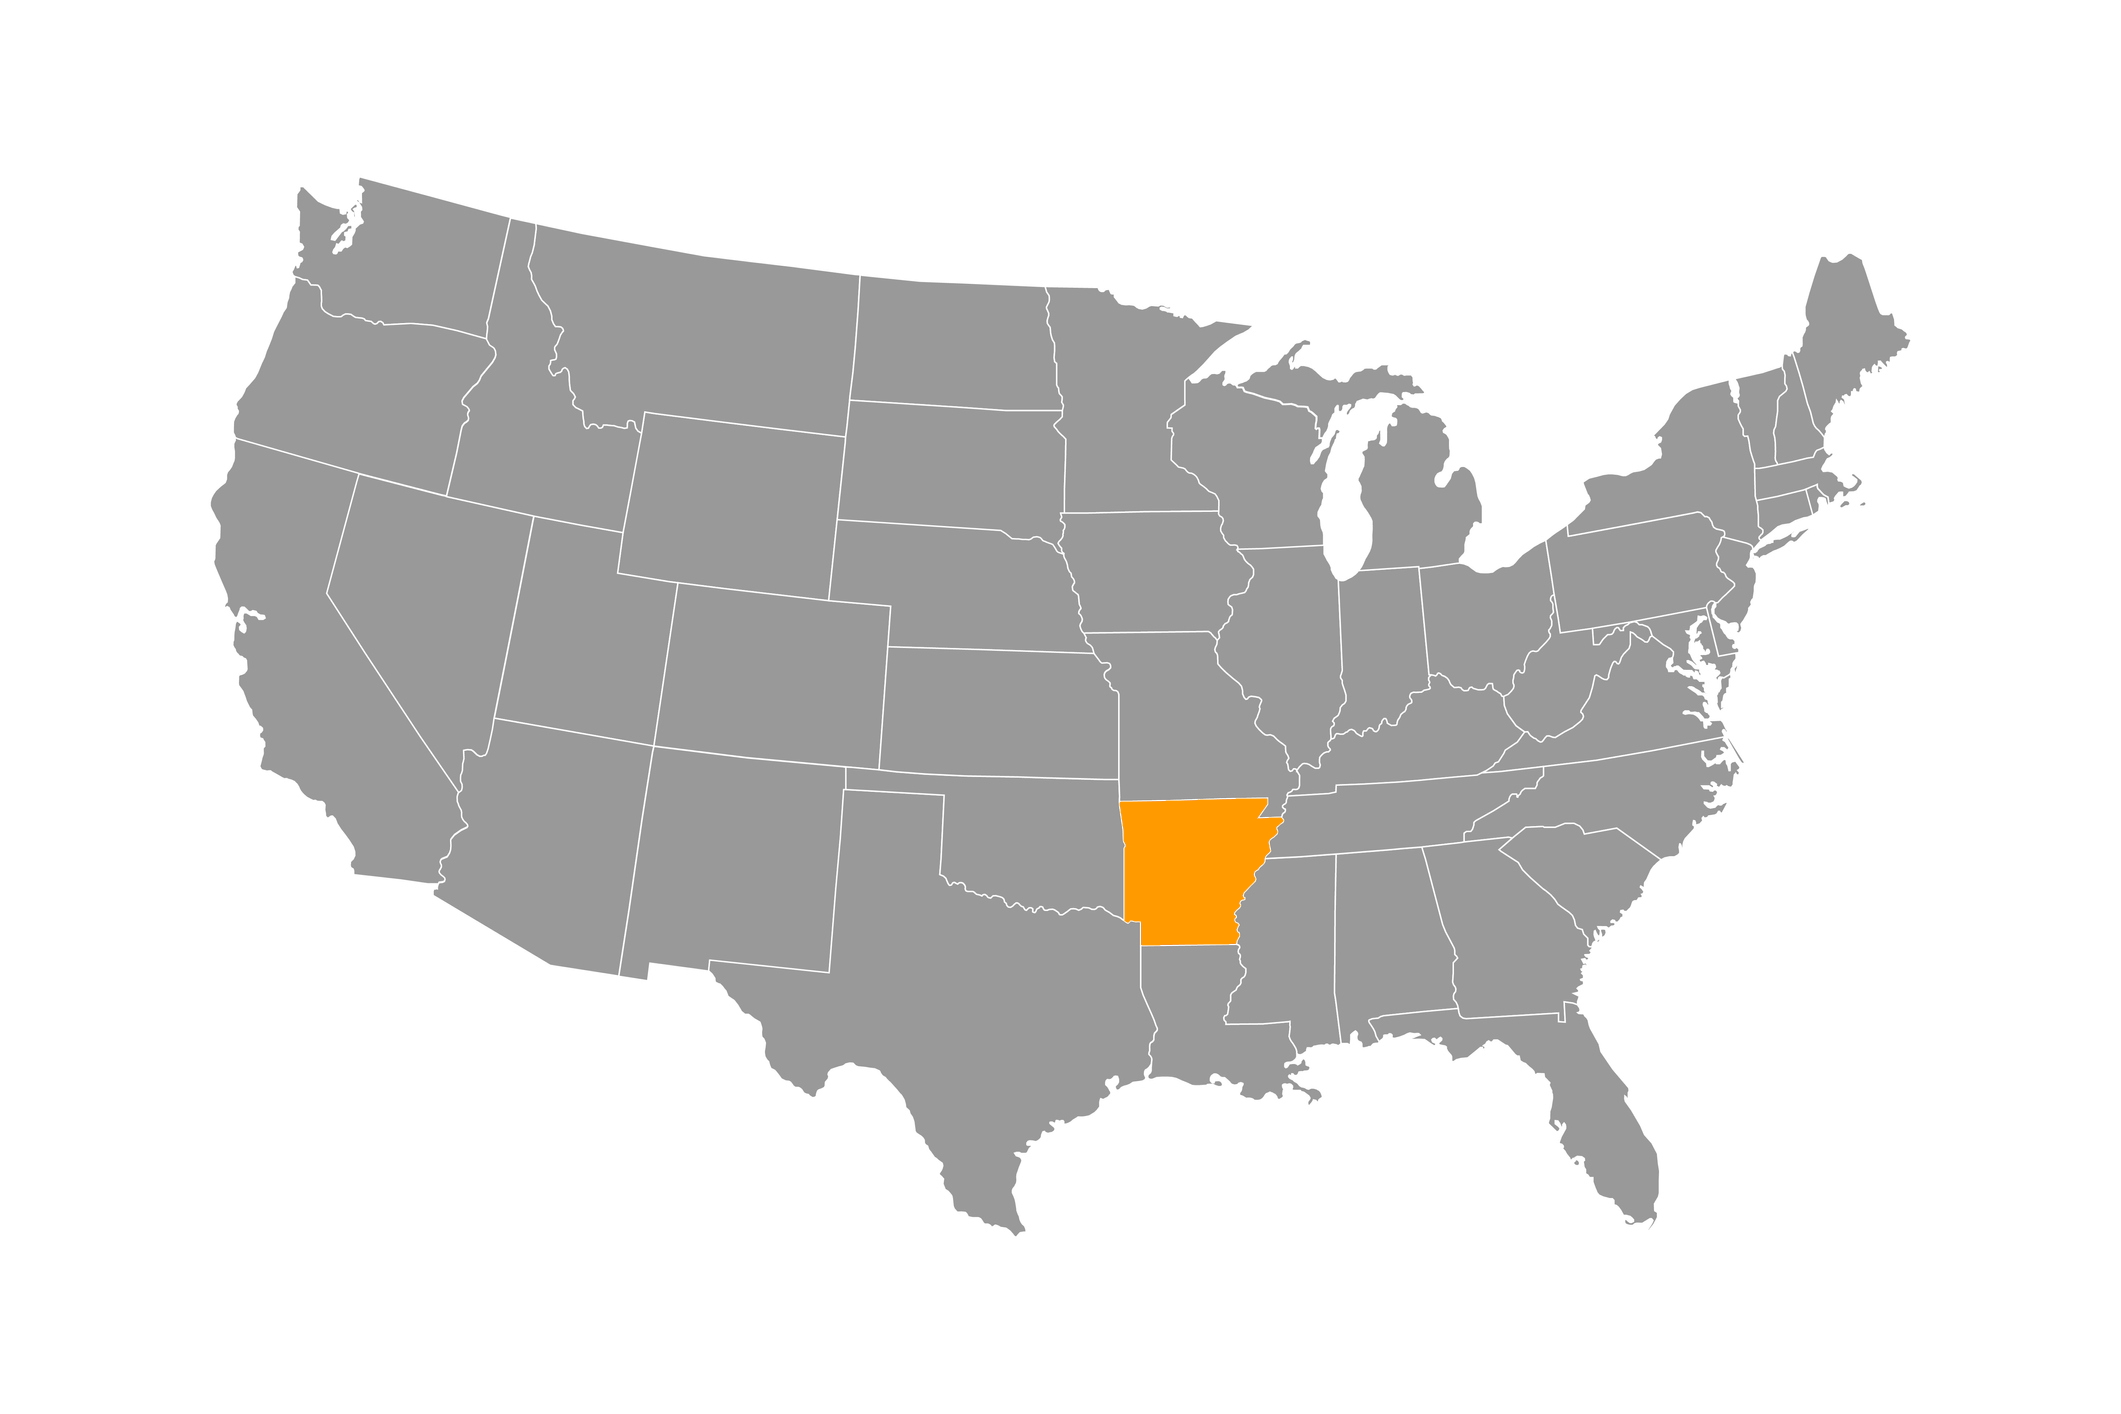 A map of the United States with Arkansas highlighted in orange